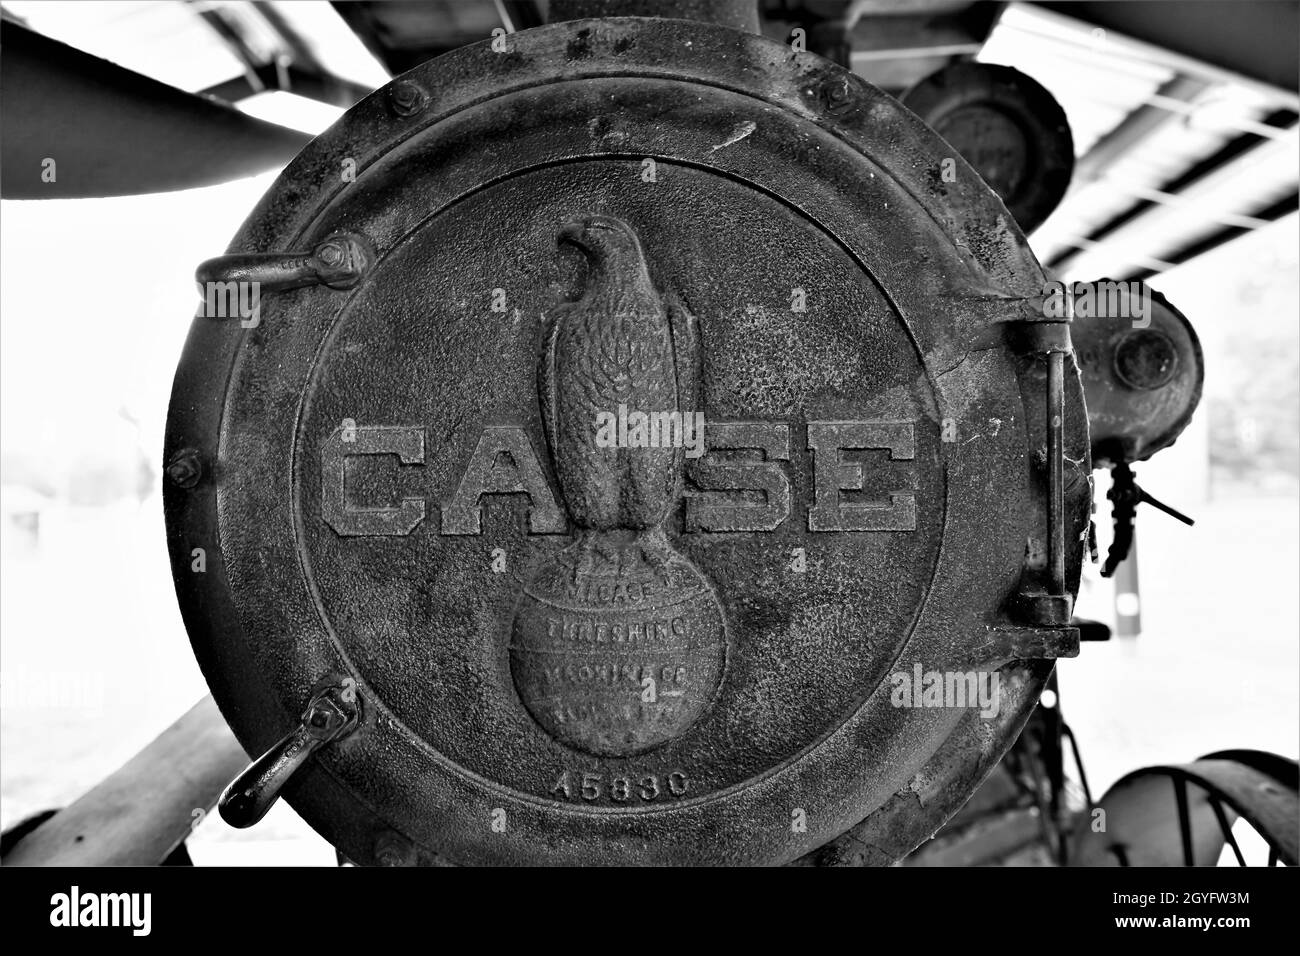 1912 J.I. Case steam traction engine. Stock Photo